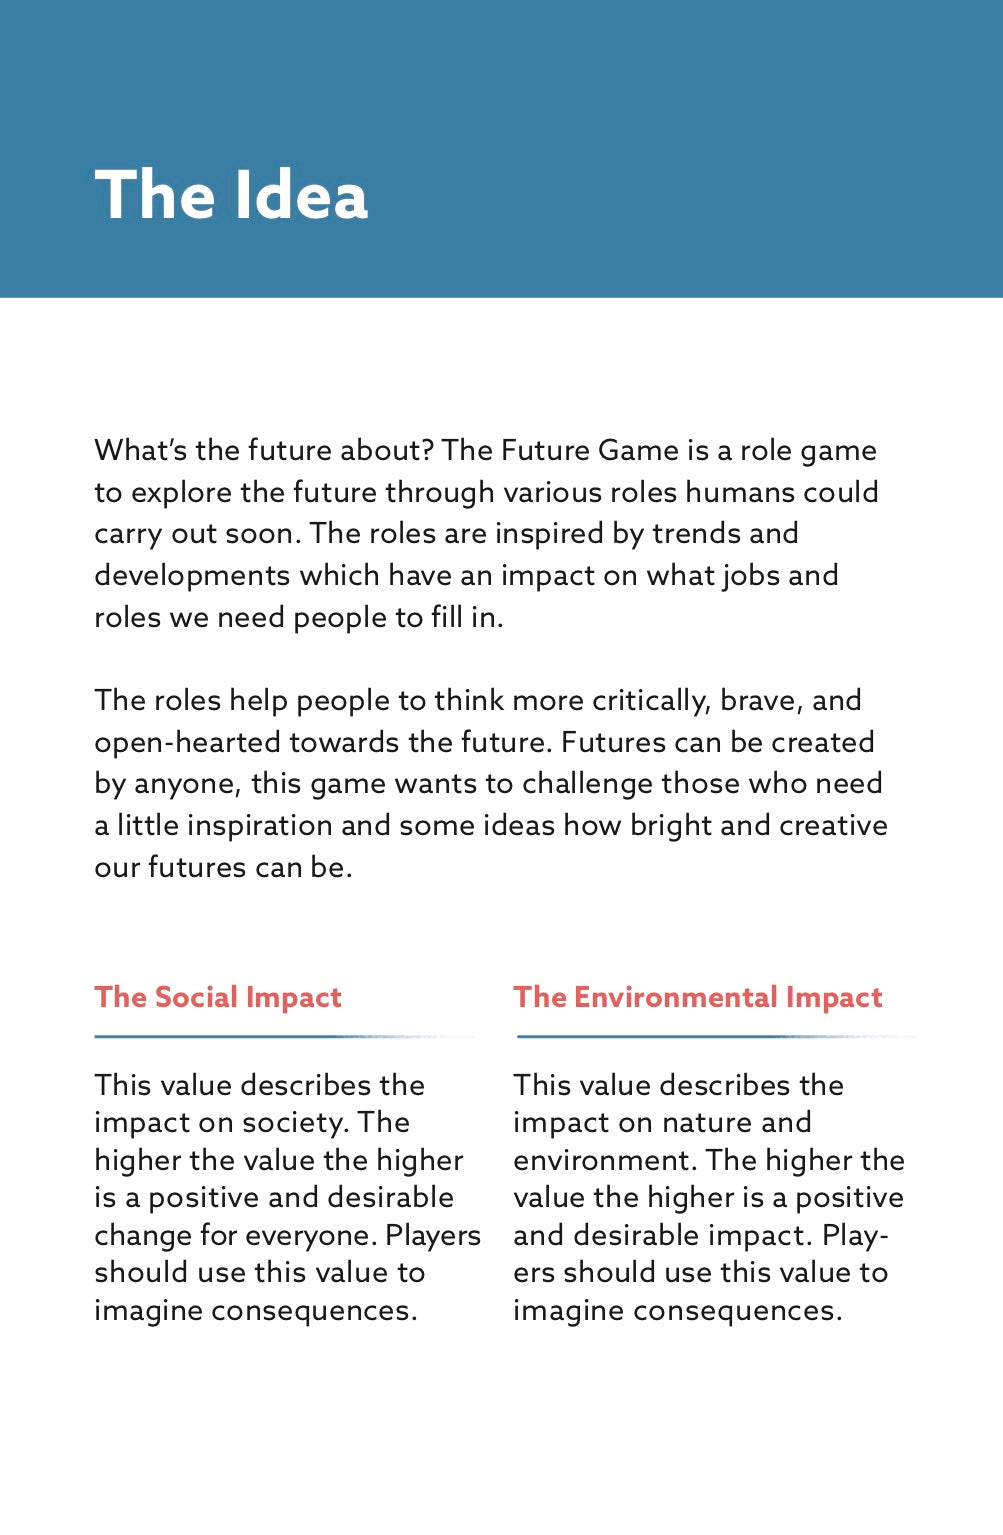 The Future Game 2050 - Playing Cards